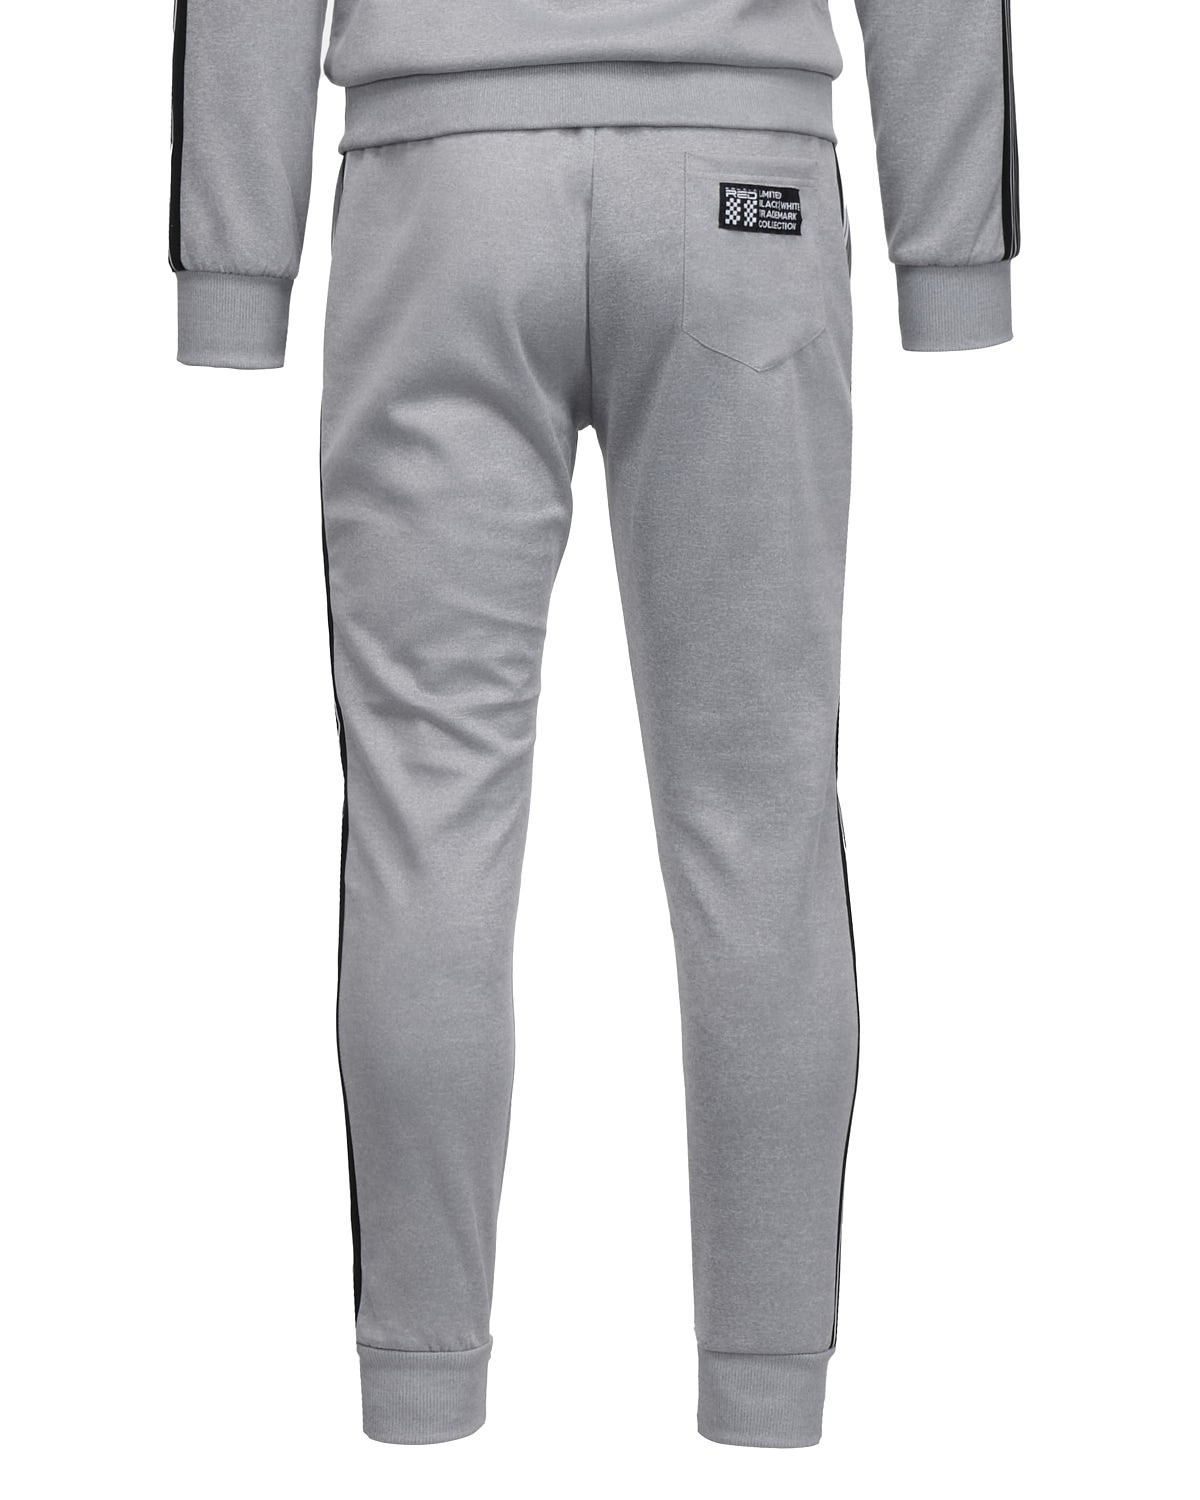 REFLEXERO SPORT IS YOUR GANG Tracksuit Silver